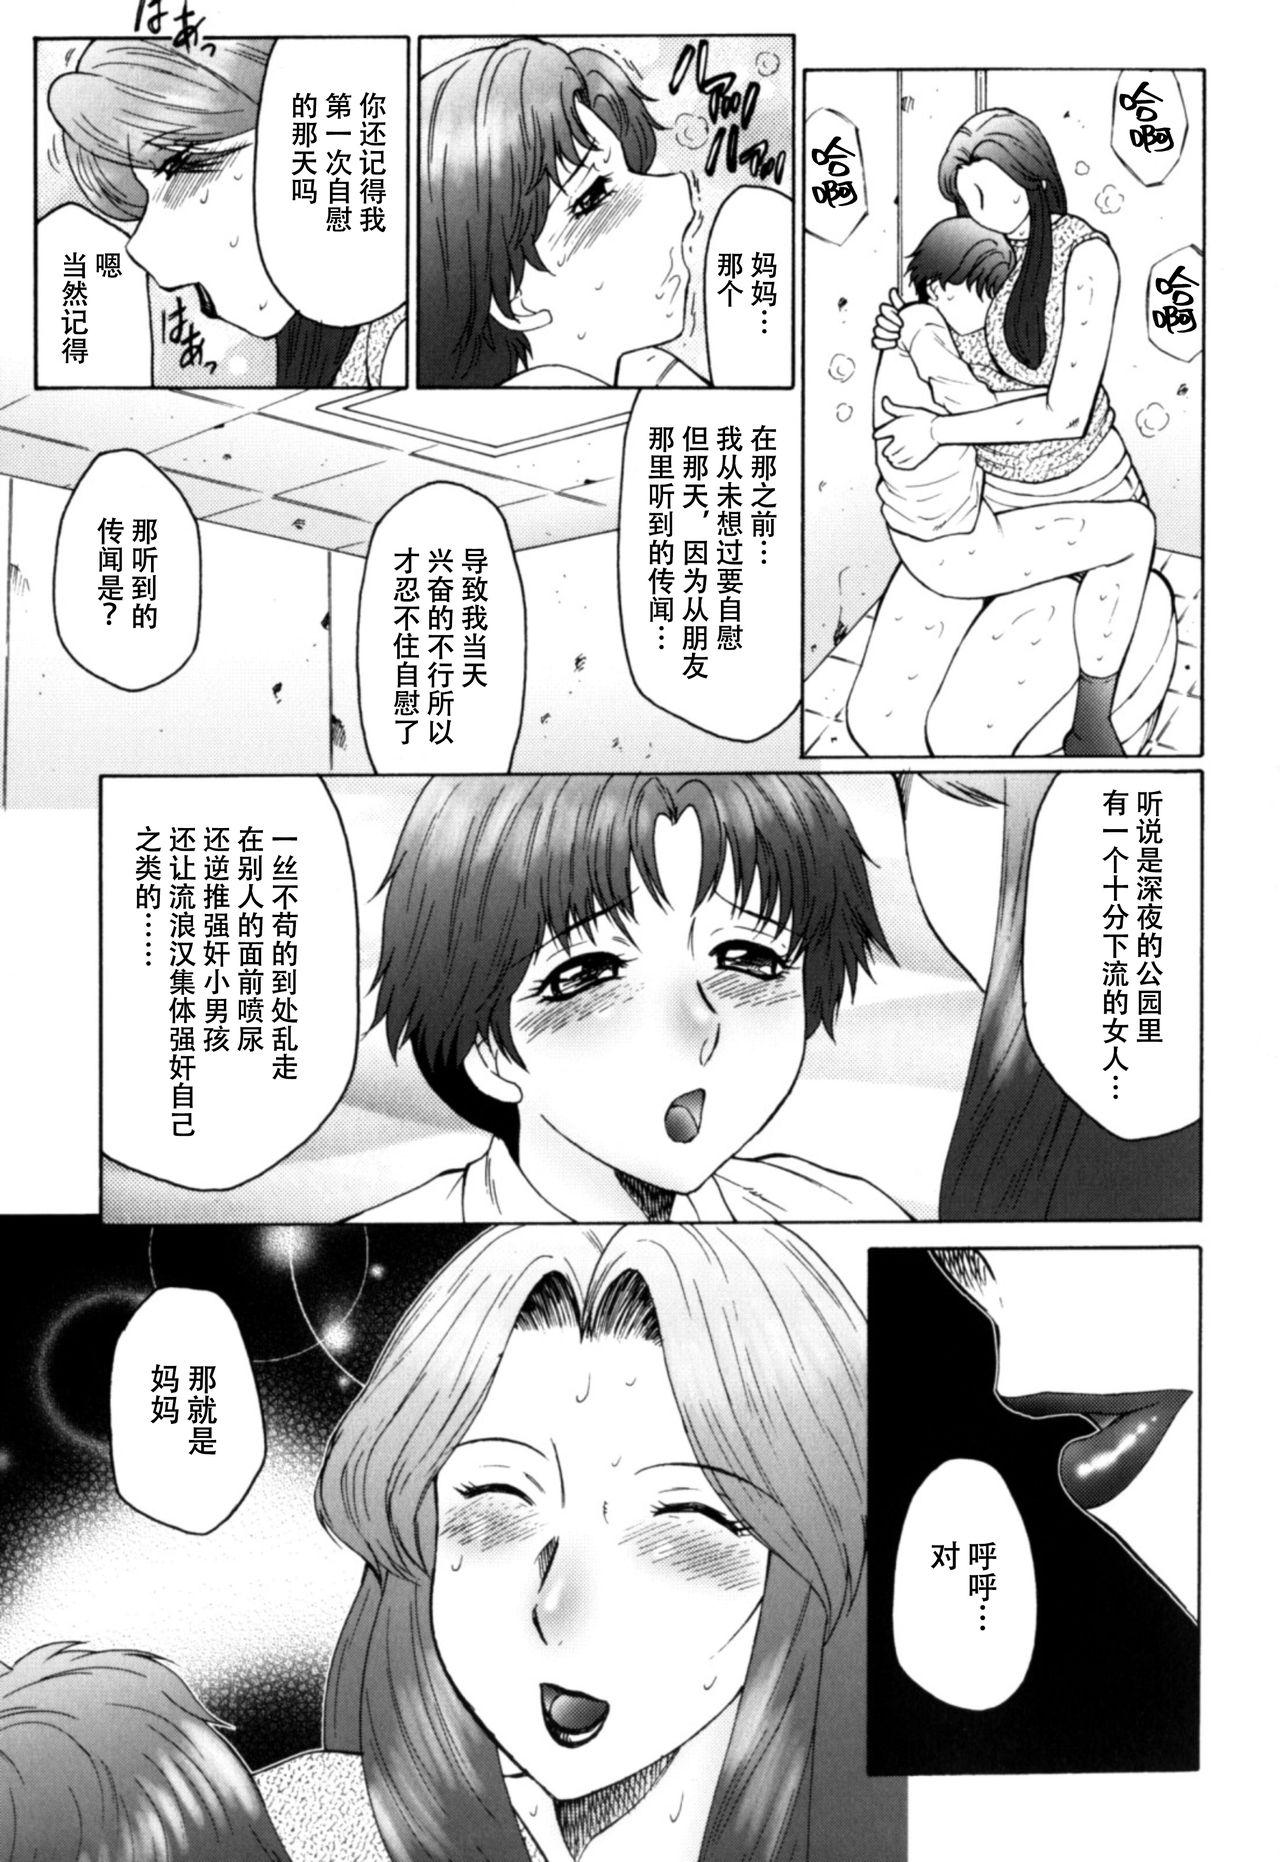 Amature [Fuusen Club] Haha Mamire Ch. 9 [Chinese]【不可视汉化】 Fuck Porn - Page 6